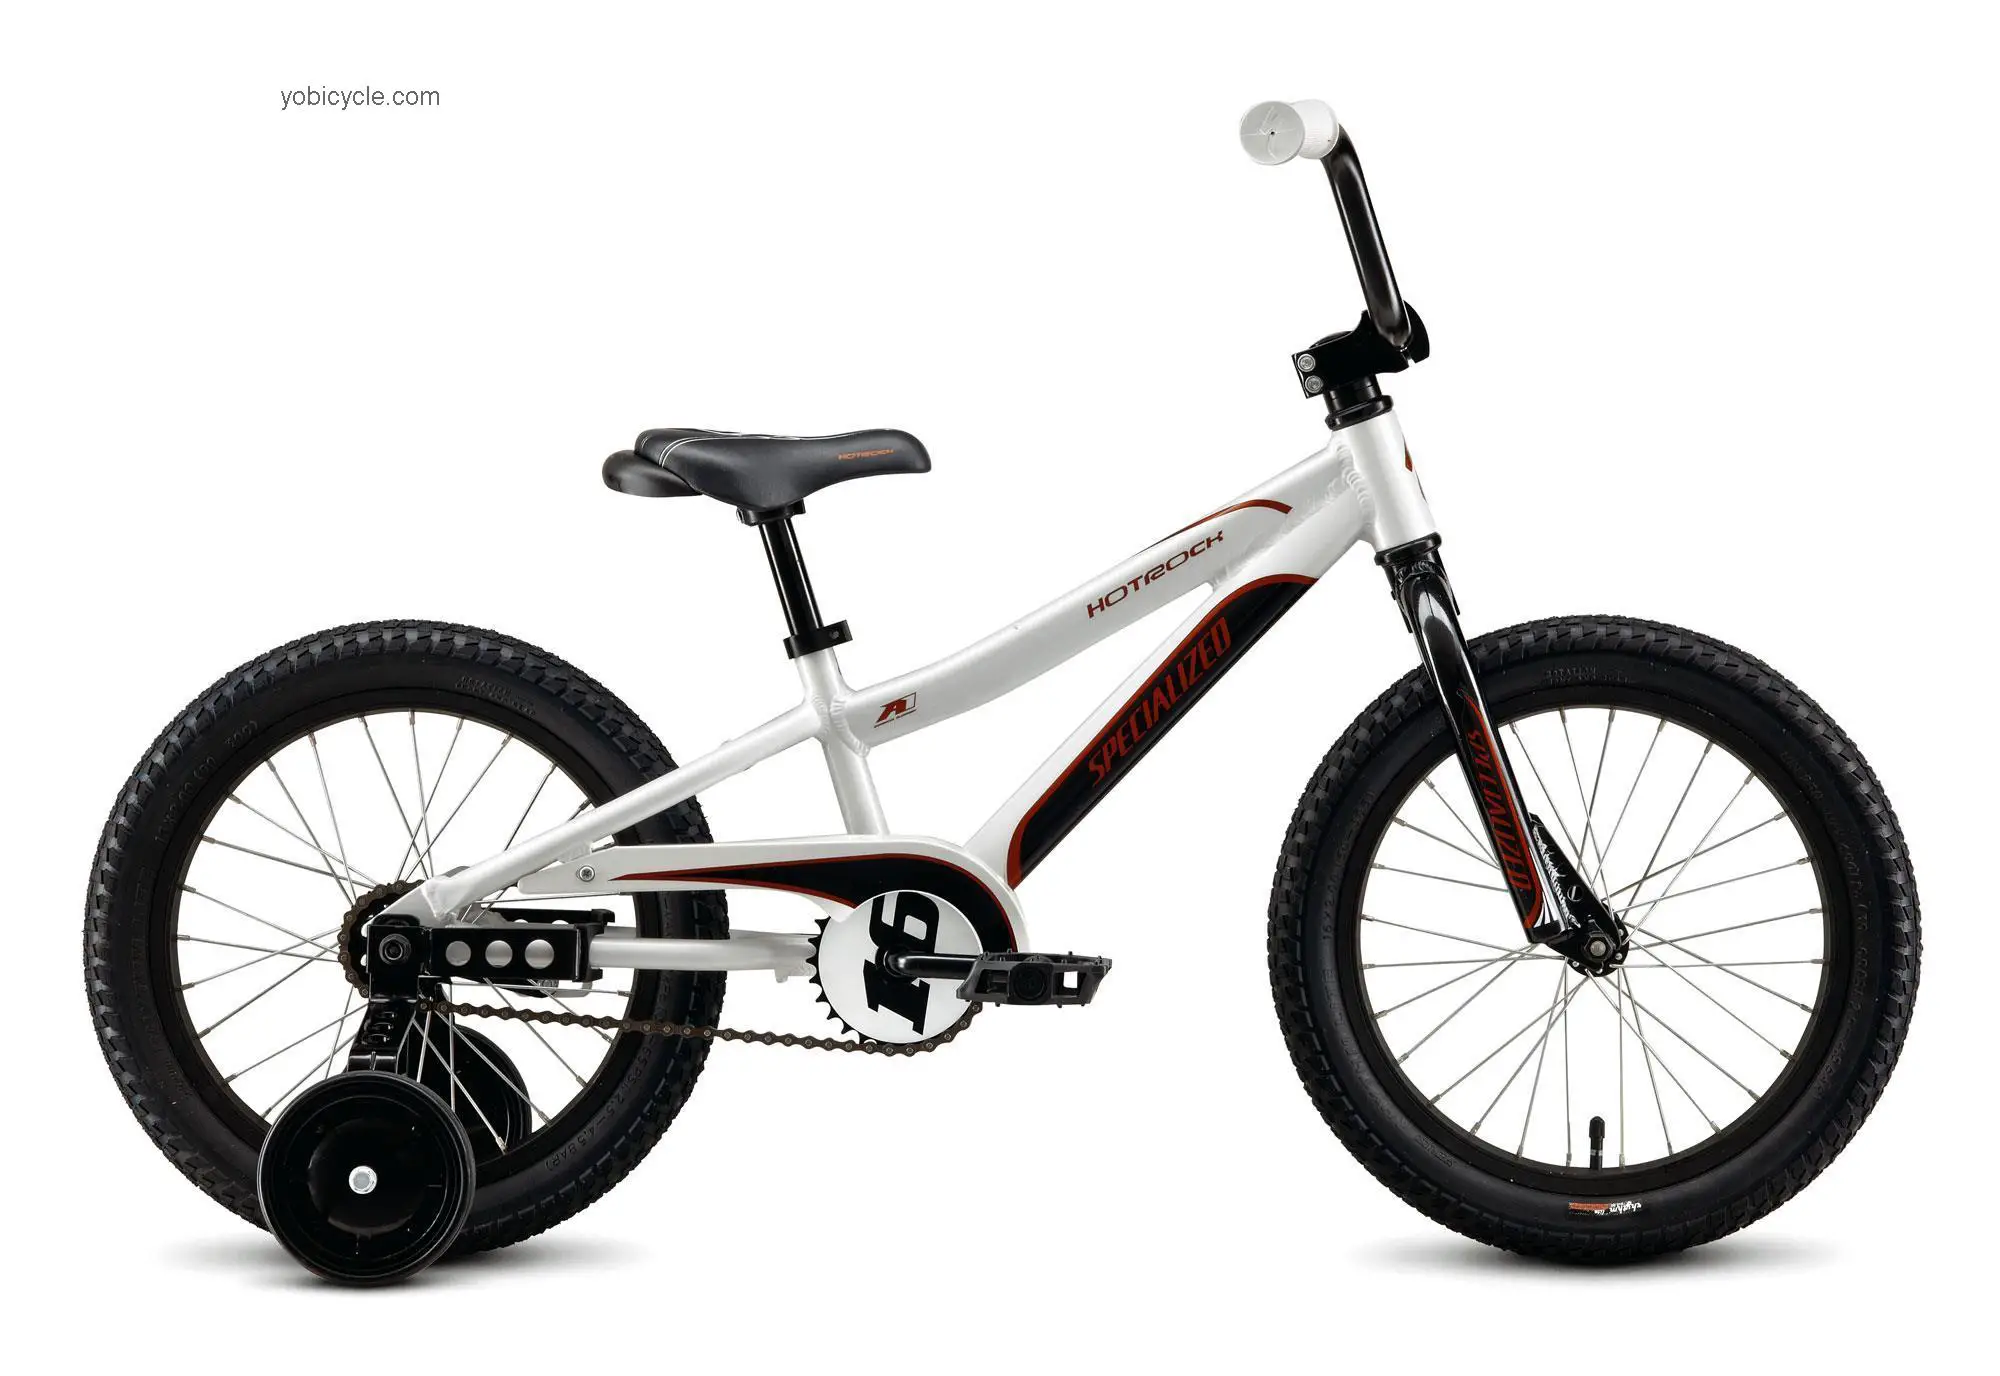 Specialized Hotrock 16 Boys competitors and comparison tool online specs and performance